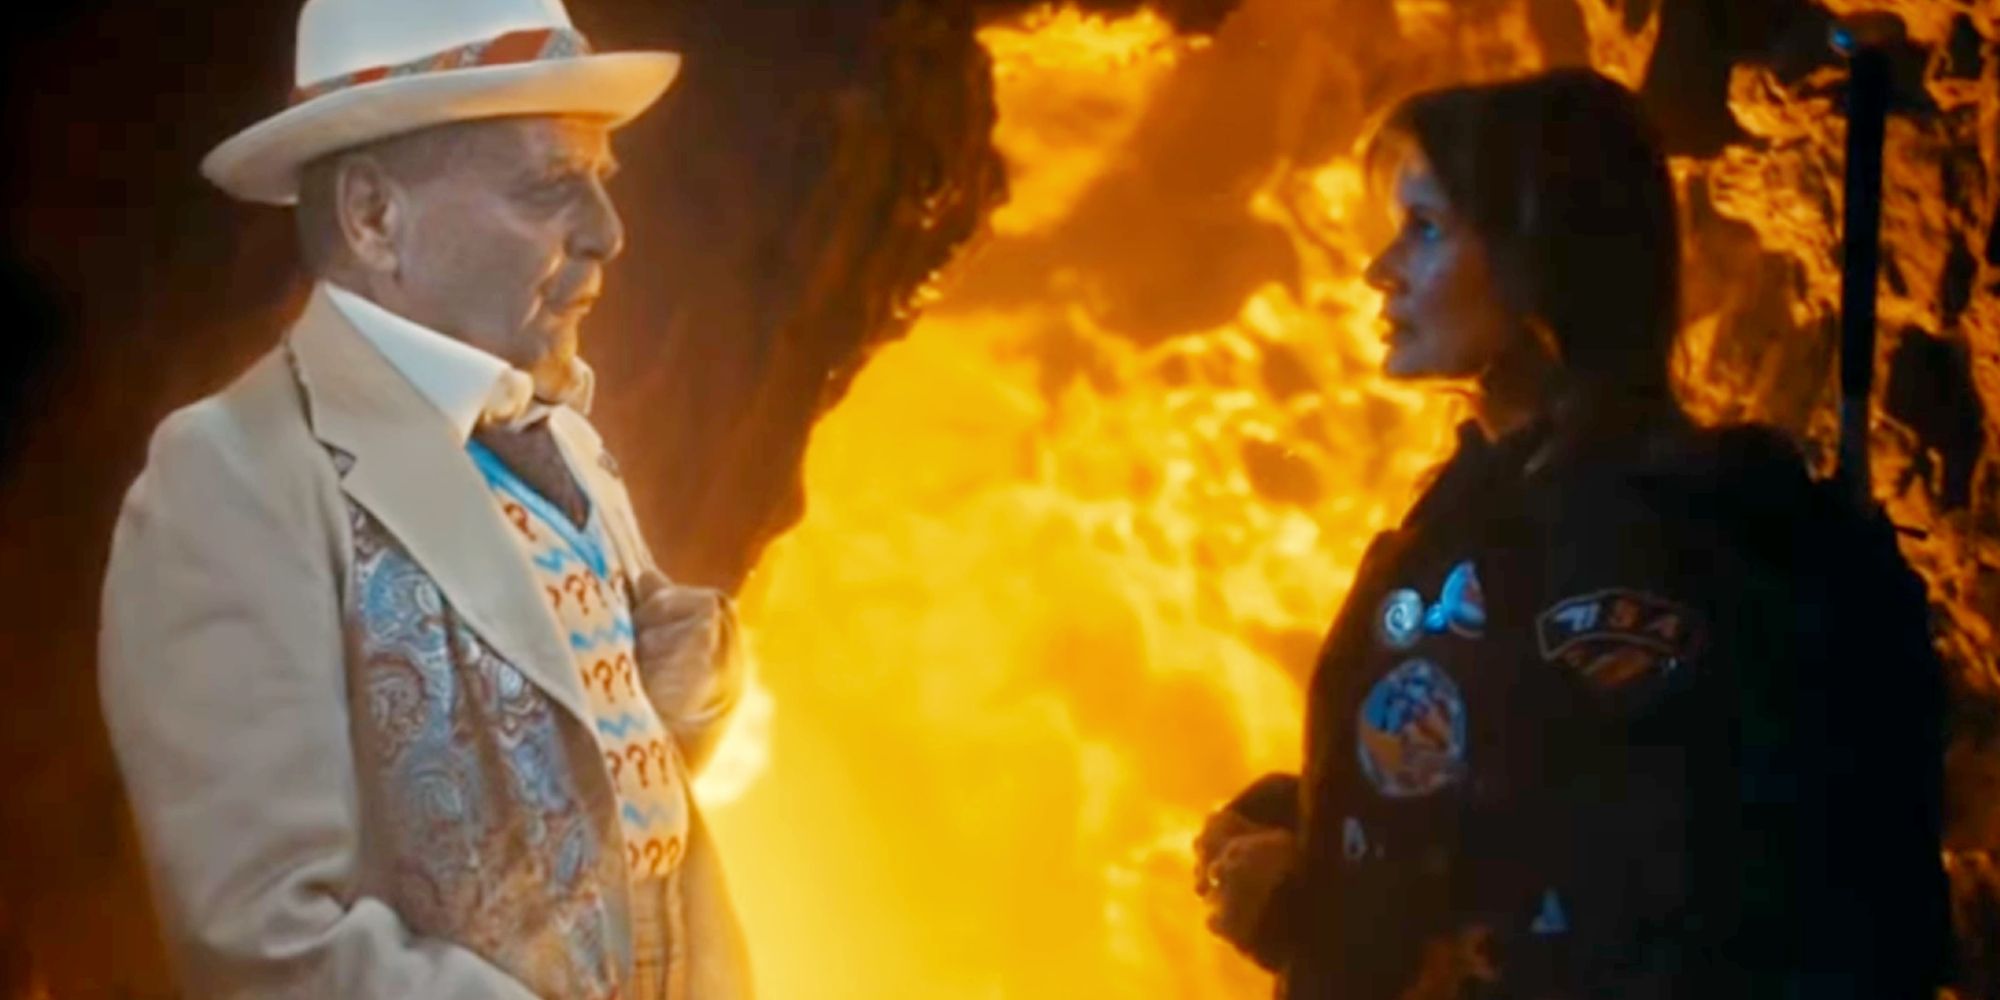 Seventh Doctor hologram and Ace in "The Power of the Doctor."